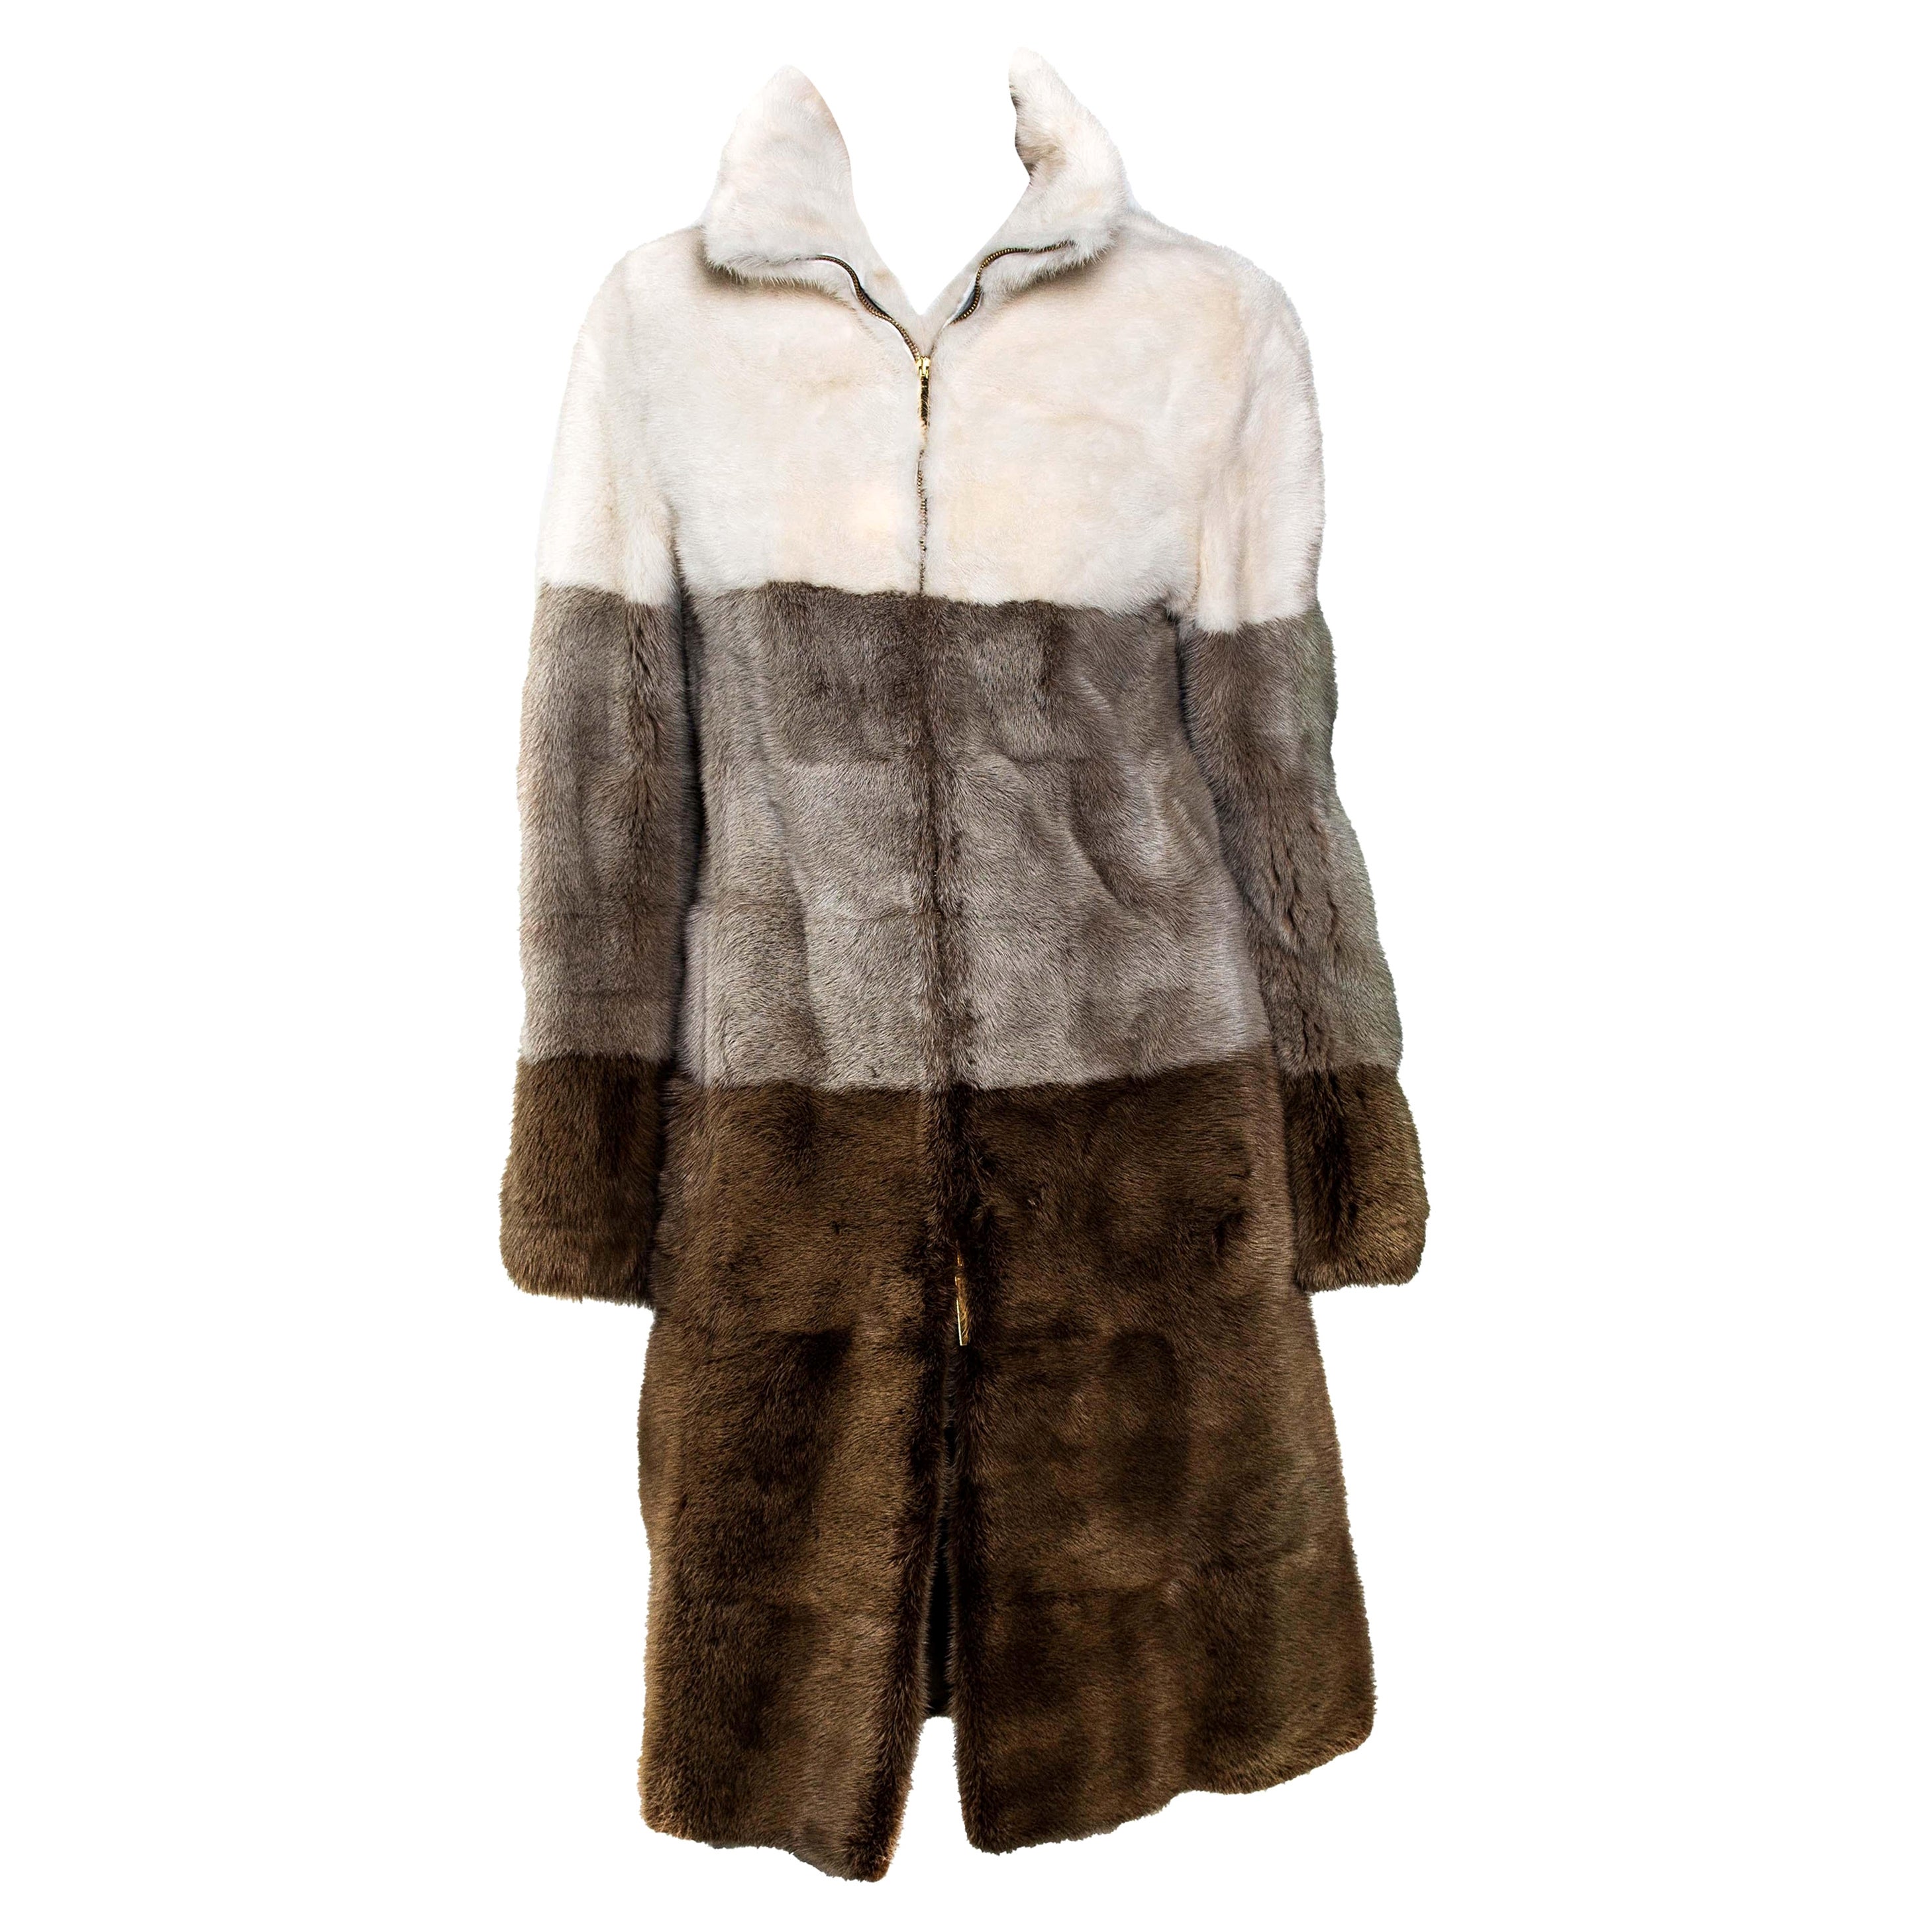 F/W 2000 Gucci by Tom Ford Runway Tricolor Dyed Mink Zip-Up Coat For Sale